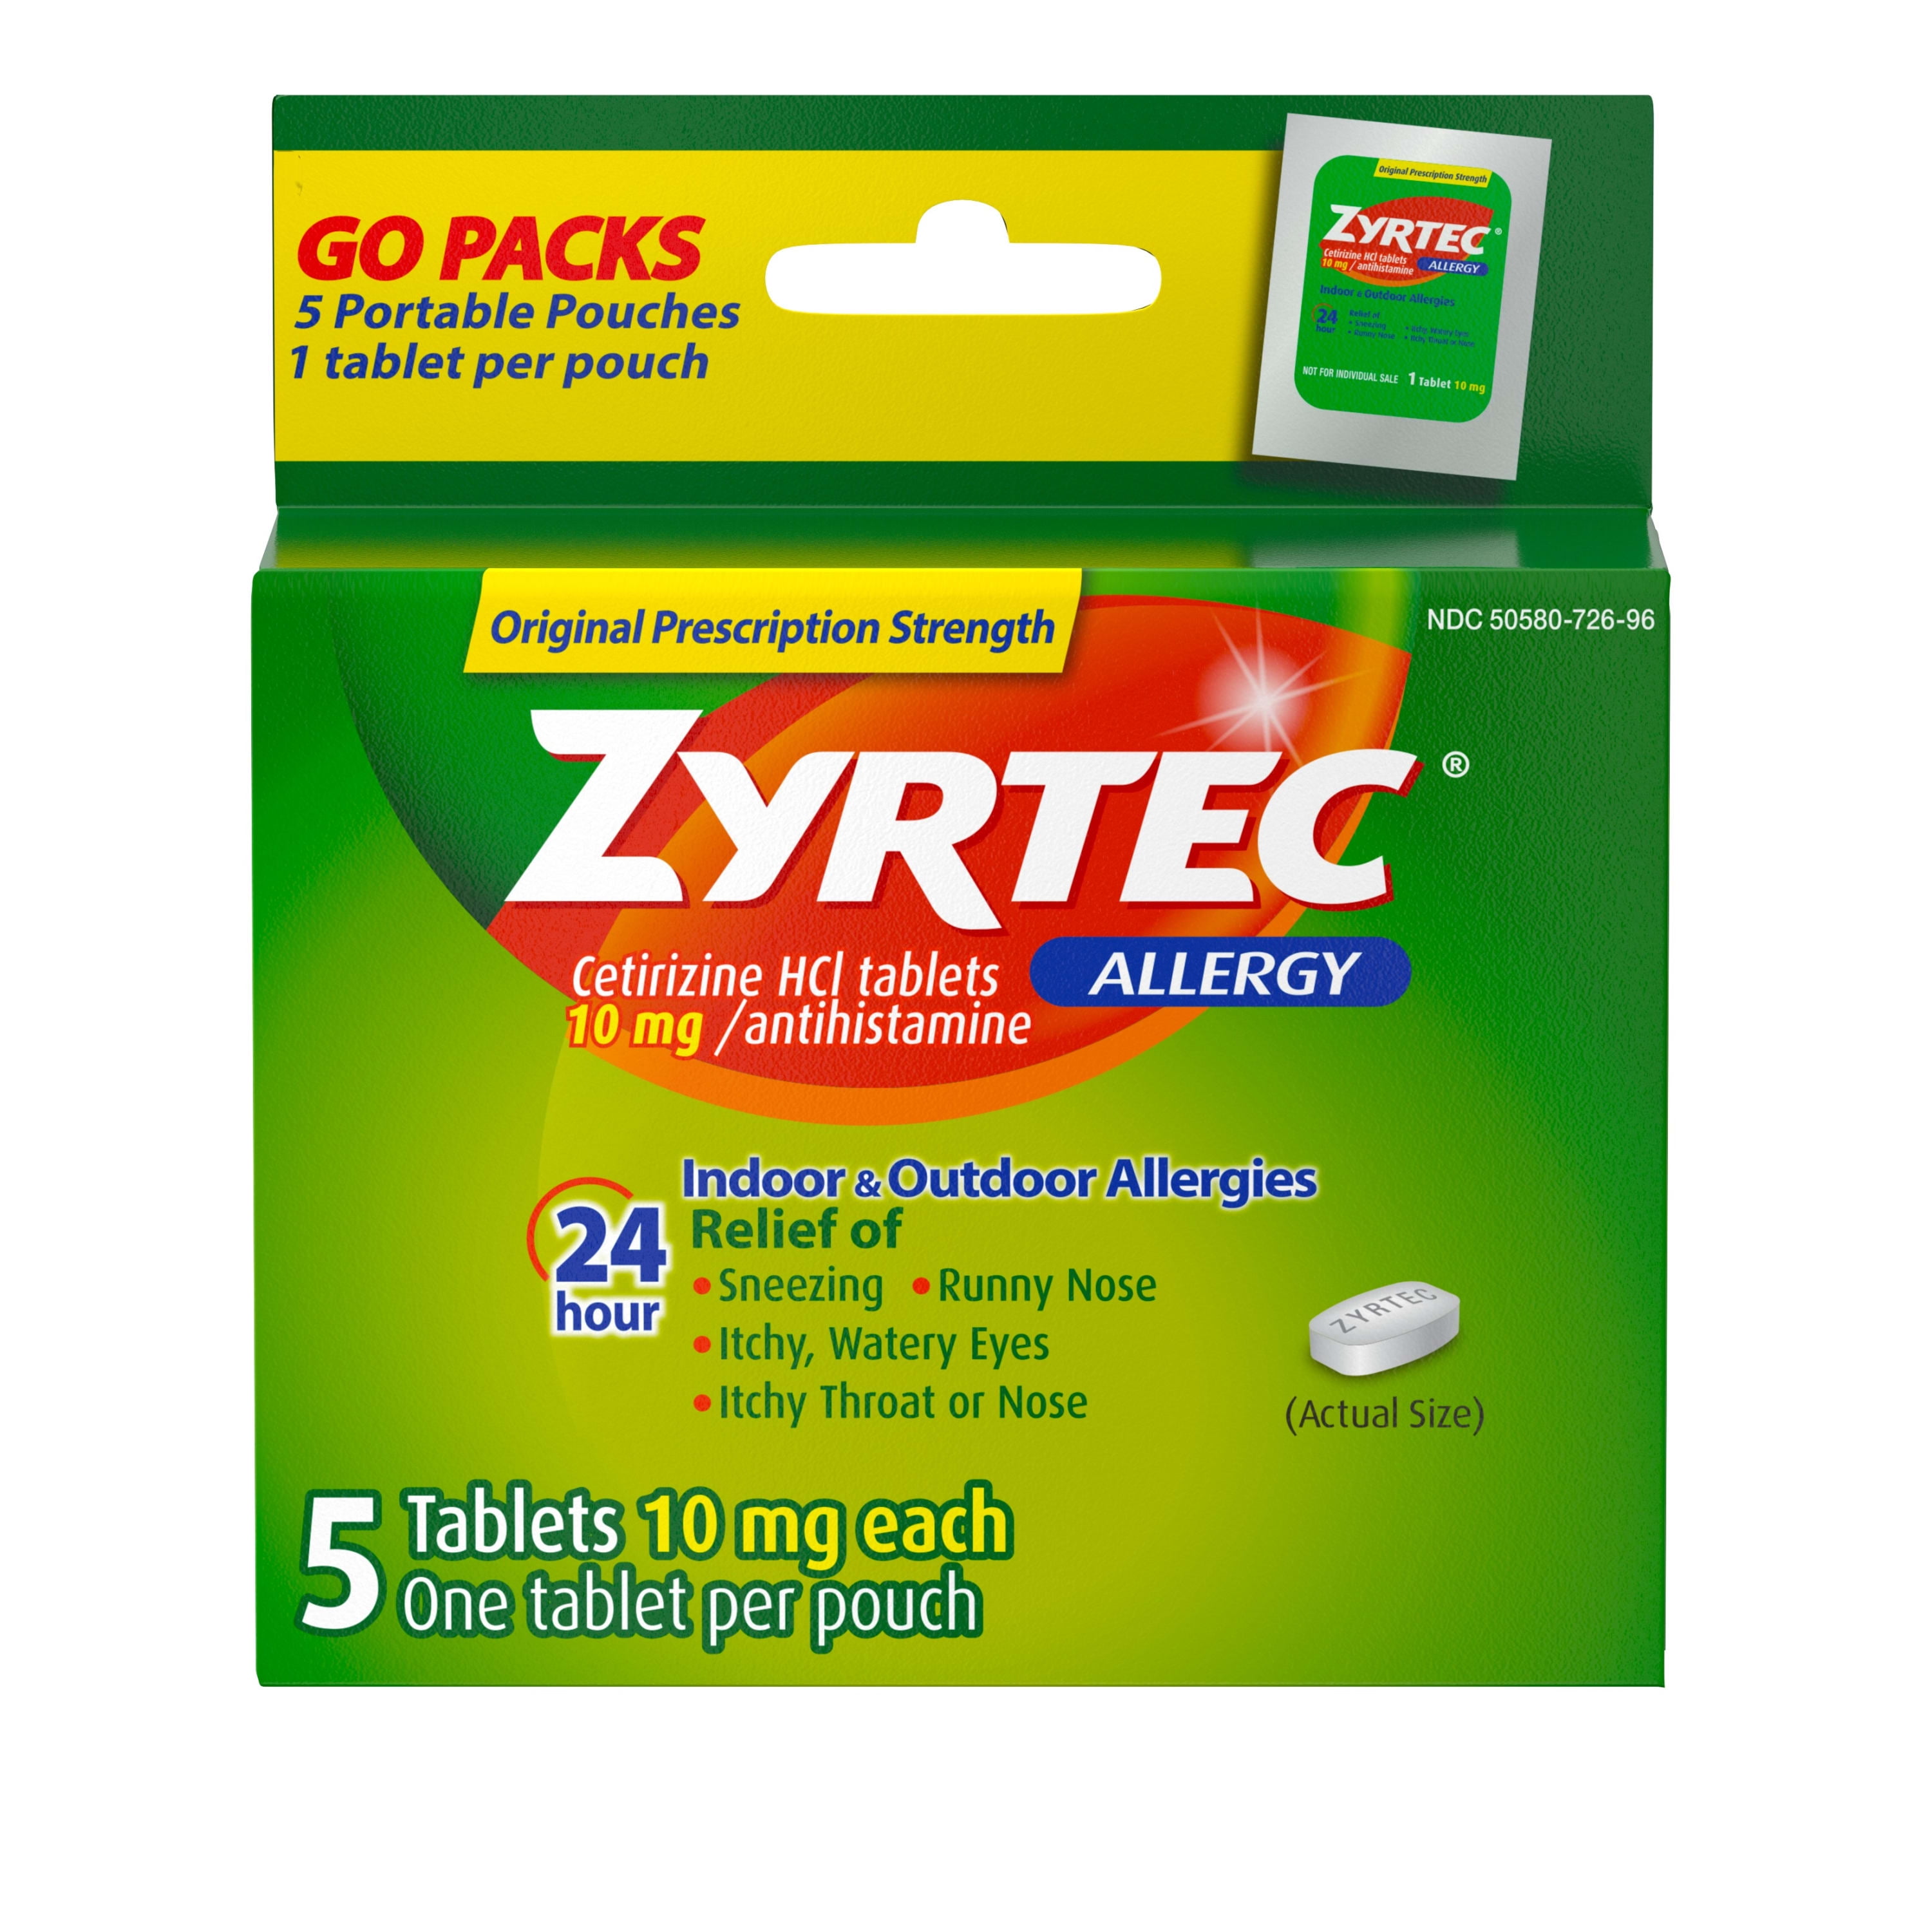 Zyrtec 24 Hour Allergy Relief Tablets, Cetirizine HCl, 5 ct, (5 x 1 ct)